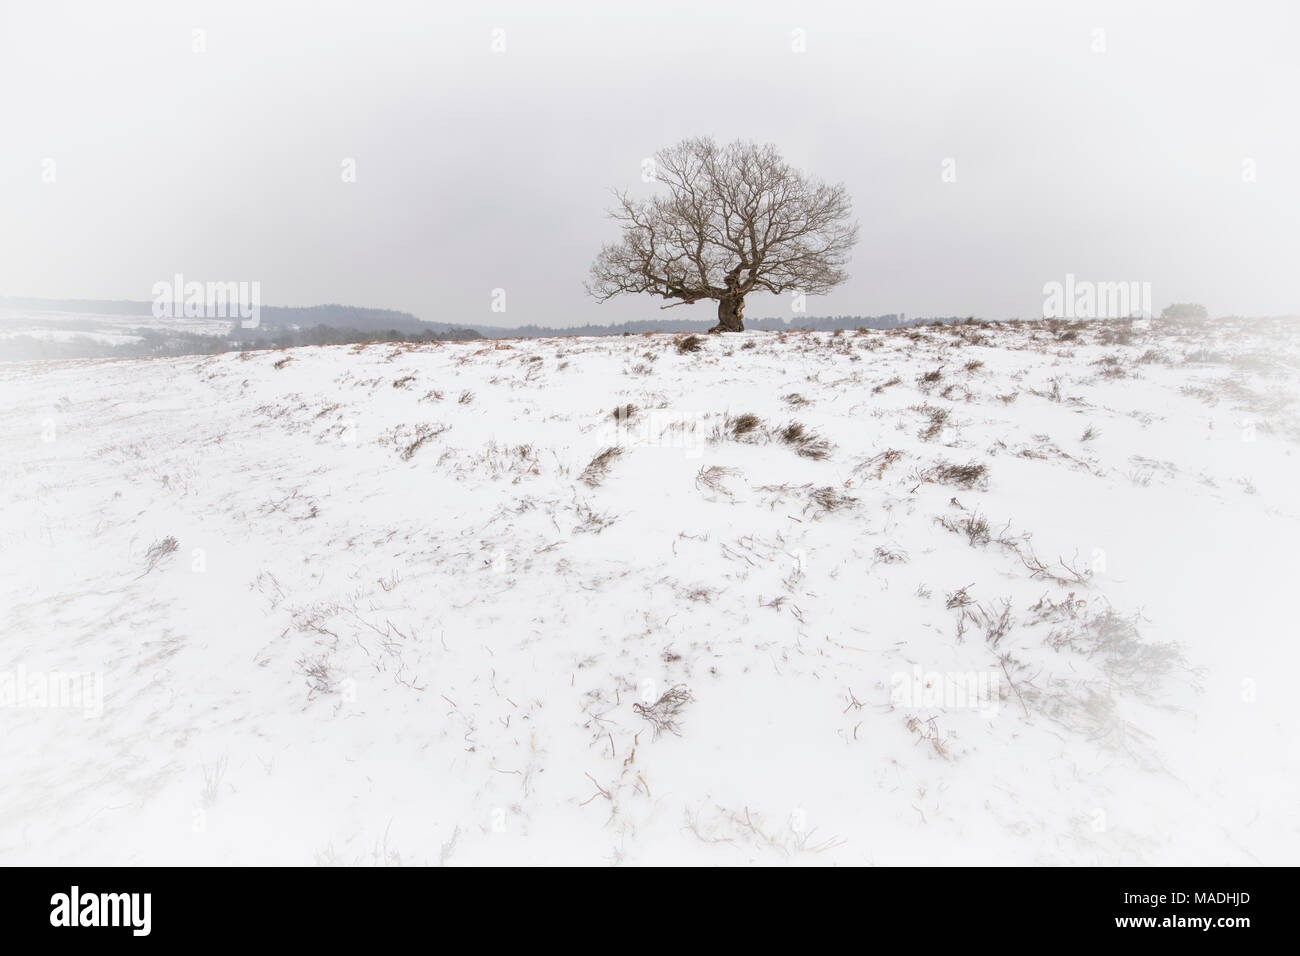 A snowy scene in the New Forest at Fritham. Stock Photo